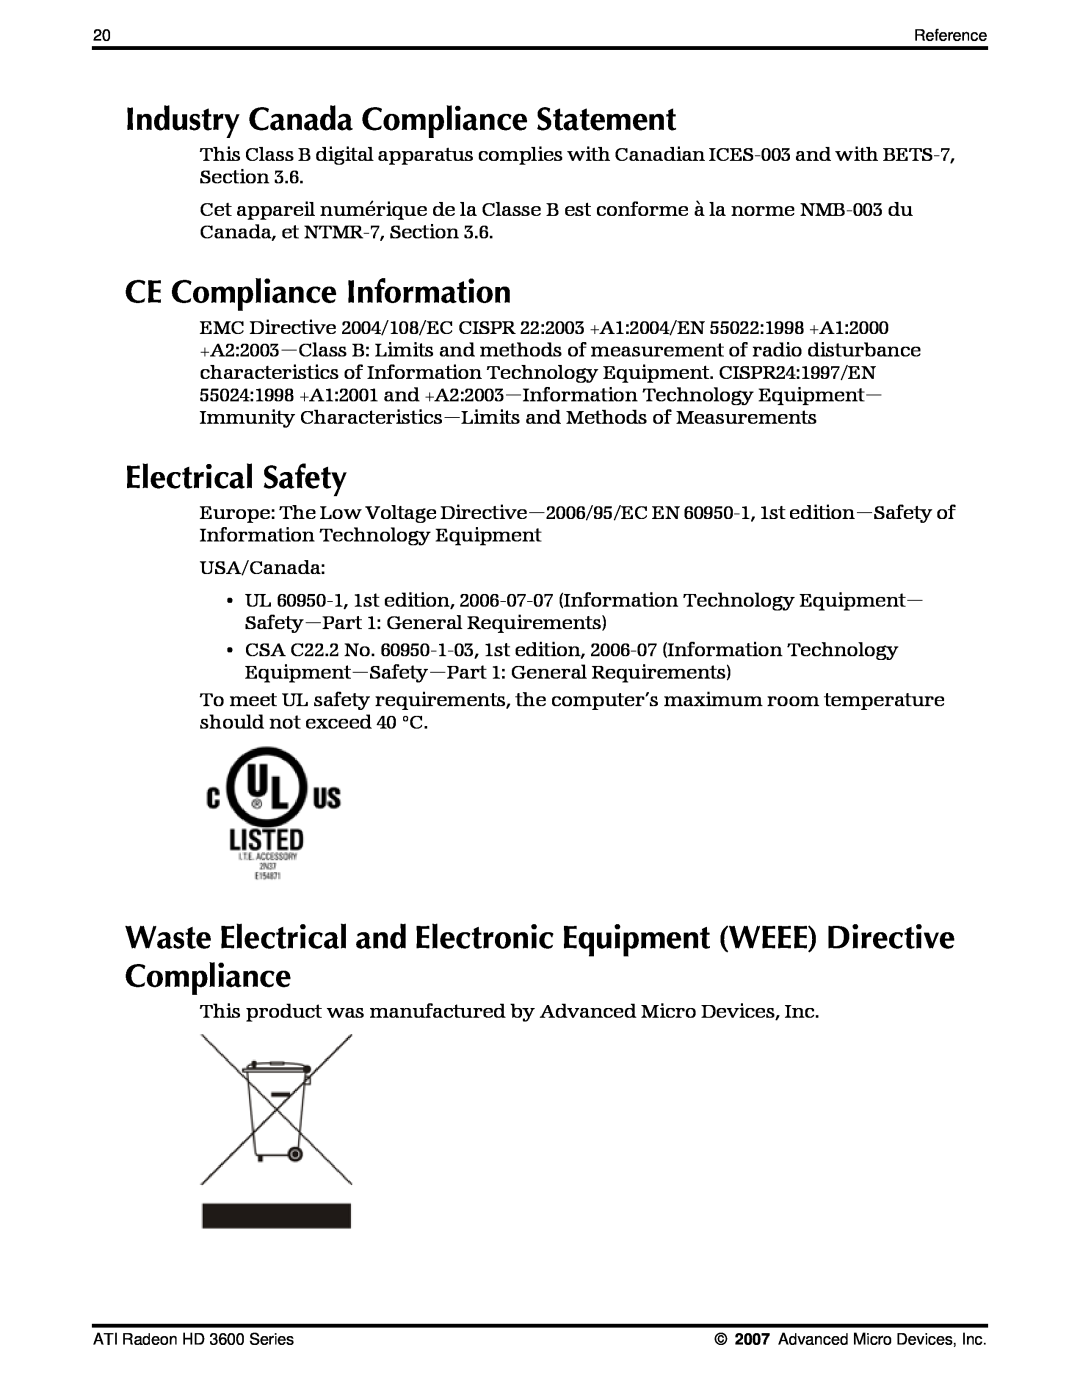 AMD 3600 manual Industry Canada Compliance Statement, CE Compliance Information, Electrical Safety 